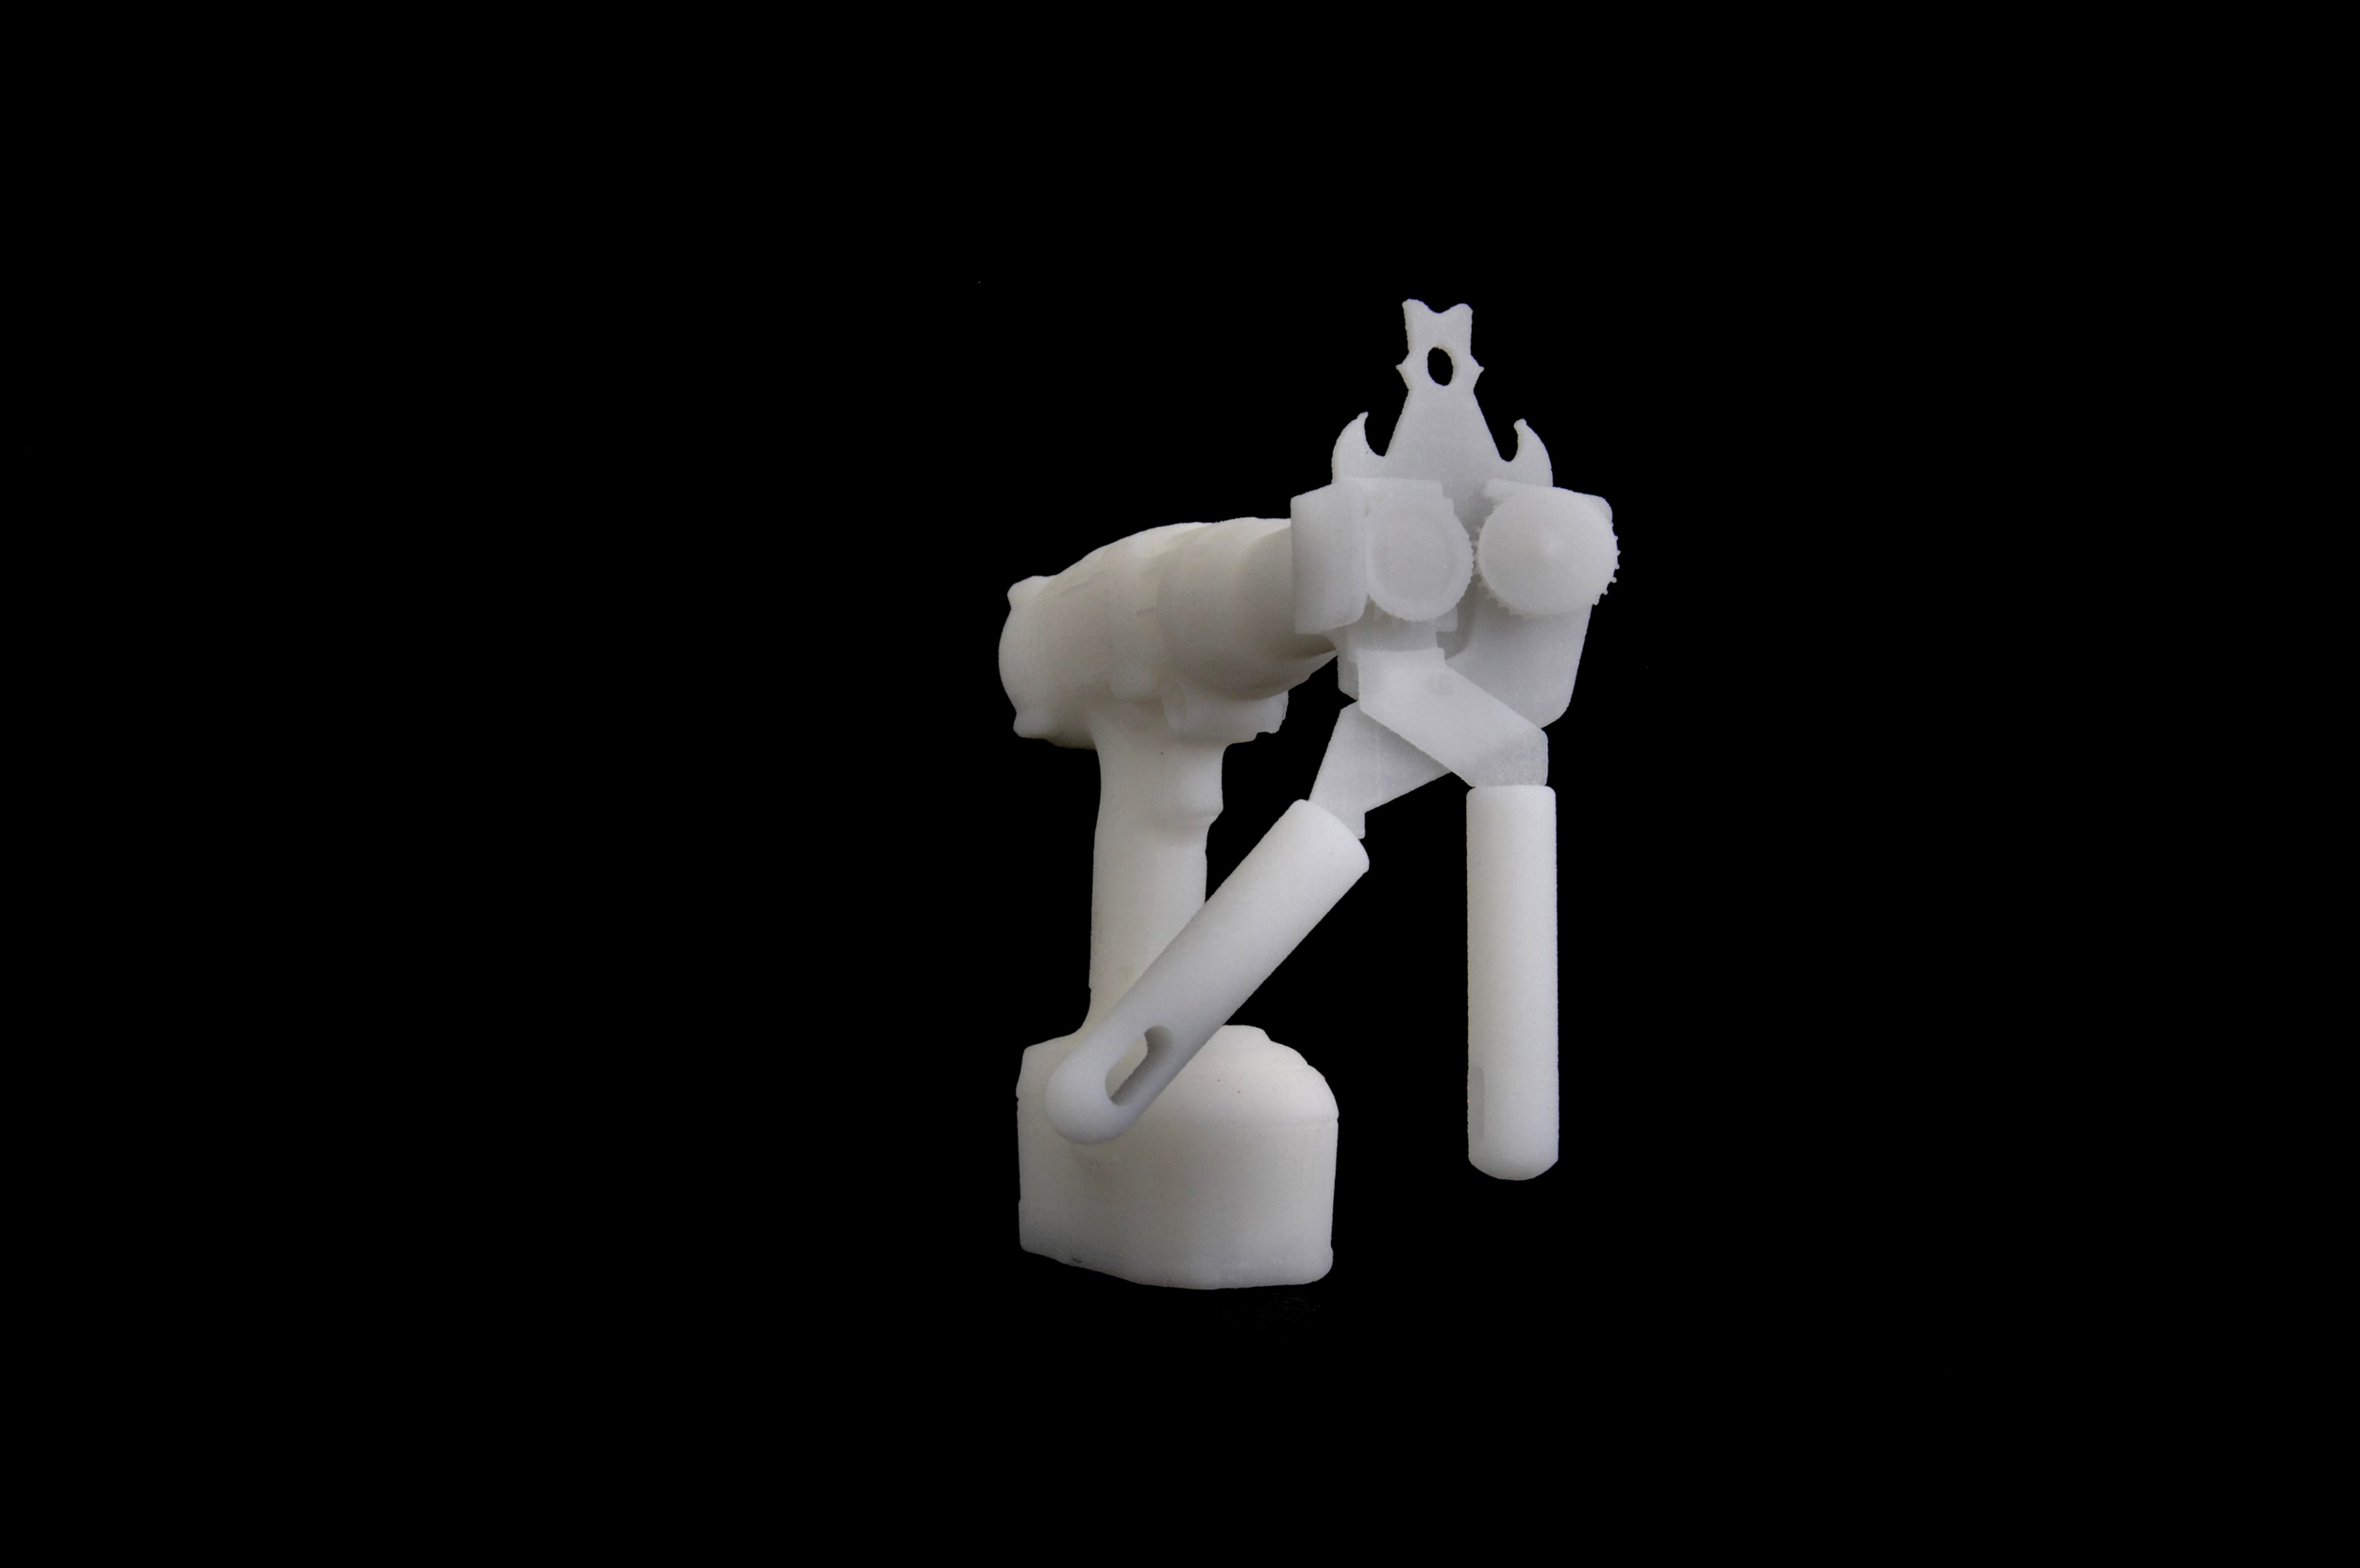  Formal metonymy, 2017, A projection of an animated 3D printed object - a can opener connected to a battery drill, 12 x 6 x 11 cm, Courtesy of the artist and Gypsum Gallery 